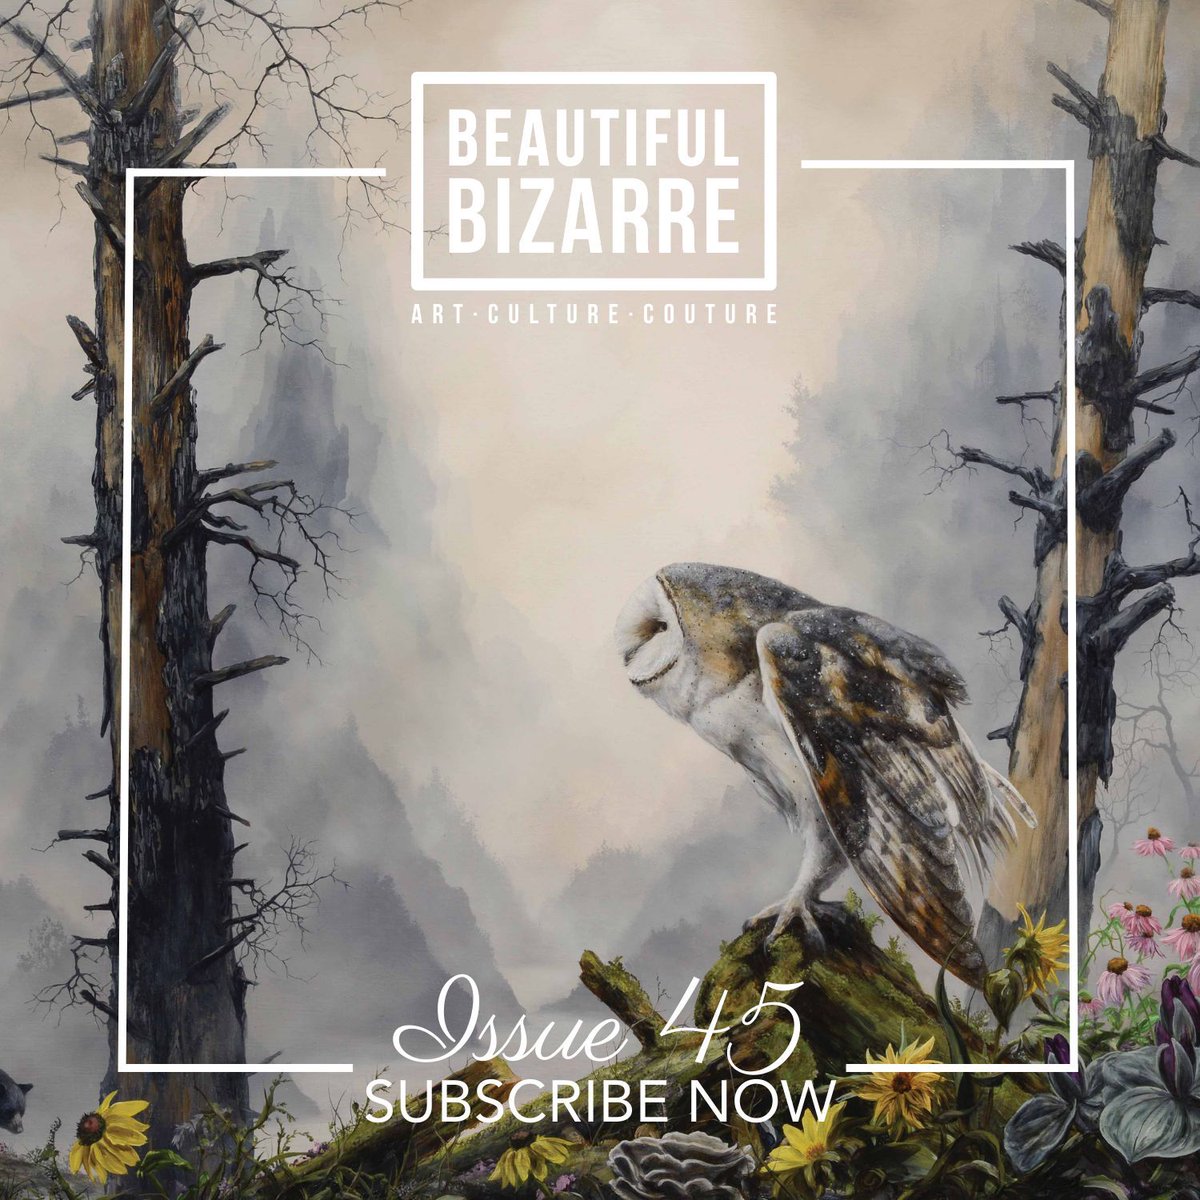 . @mashburn_brian takes us through his creation process in the coming June issue of Beautiful Bizarre art magazine!

Never miss an issue again. Subscribe today > store.beautifulbizarre.net/product/12-mon…

#beautifulbizarre #artmagazine #artist #newcontemporaryart #artinspiration #animalart